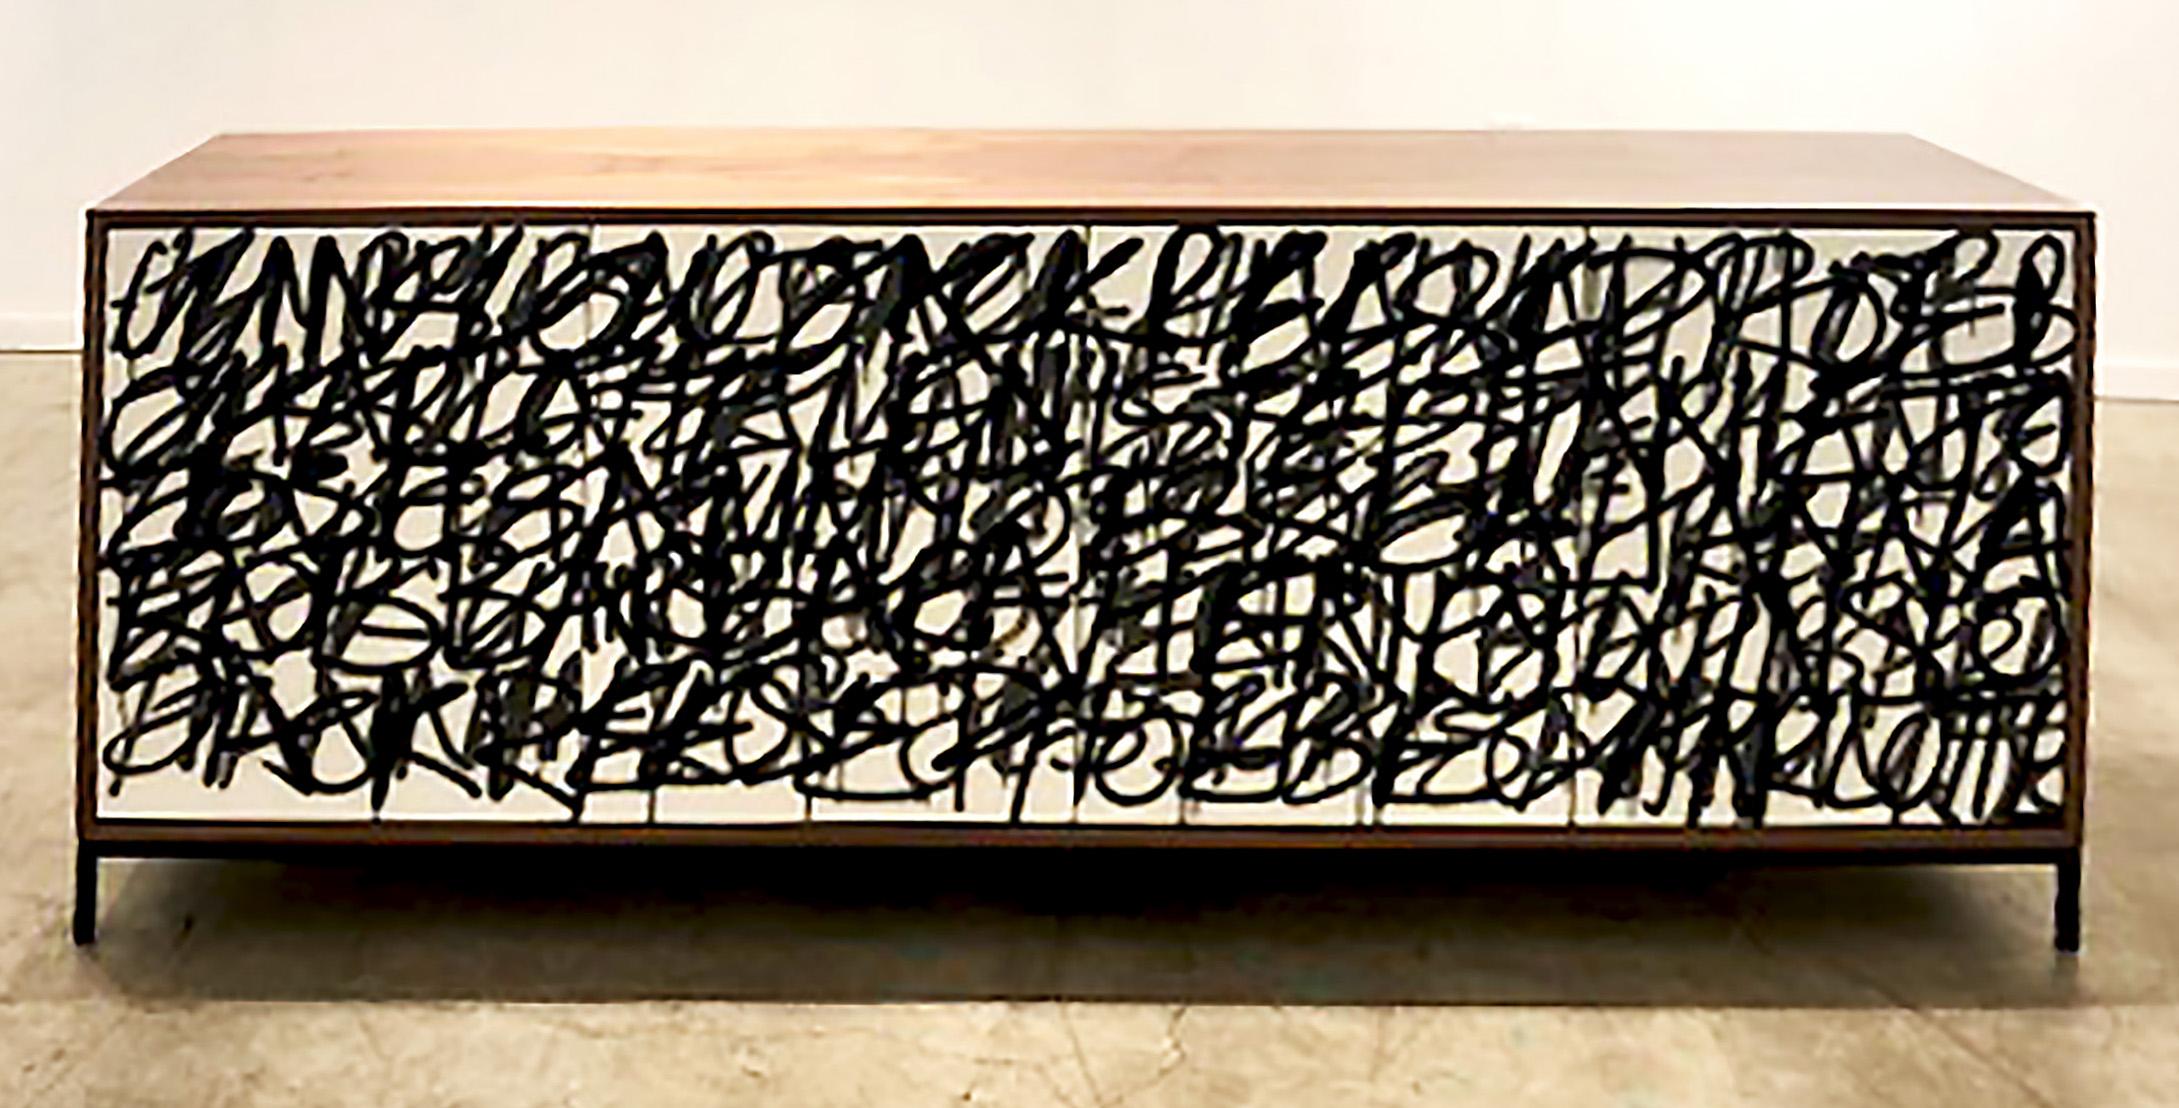 White Graffiti Credenza by Morgan Clayhall
Dimensions: D 45.72 x W 182.88 x H 81.28 cm
Materials: Solid Core Material, Oil Paint, Lacquer, Resin, Steel
Also Available: Can be customized in size, finish and color,

The White Graffiti Credenza is